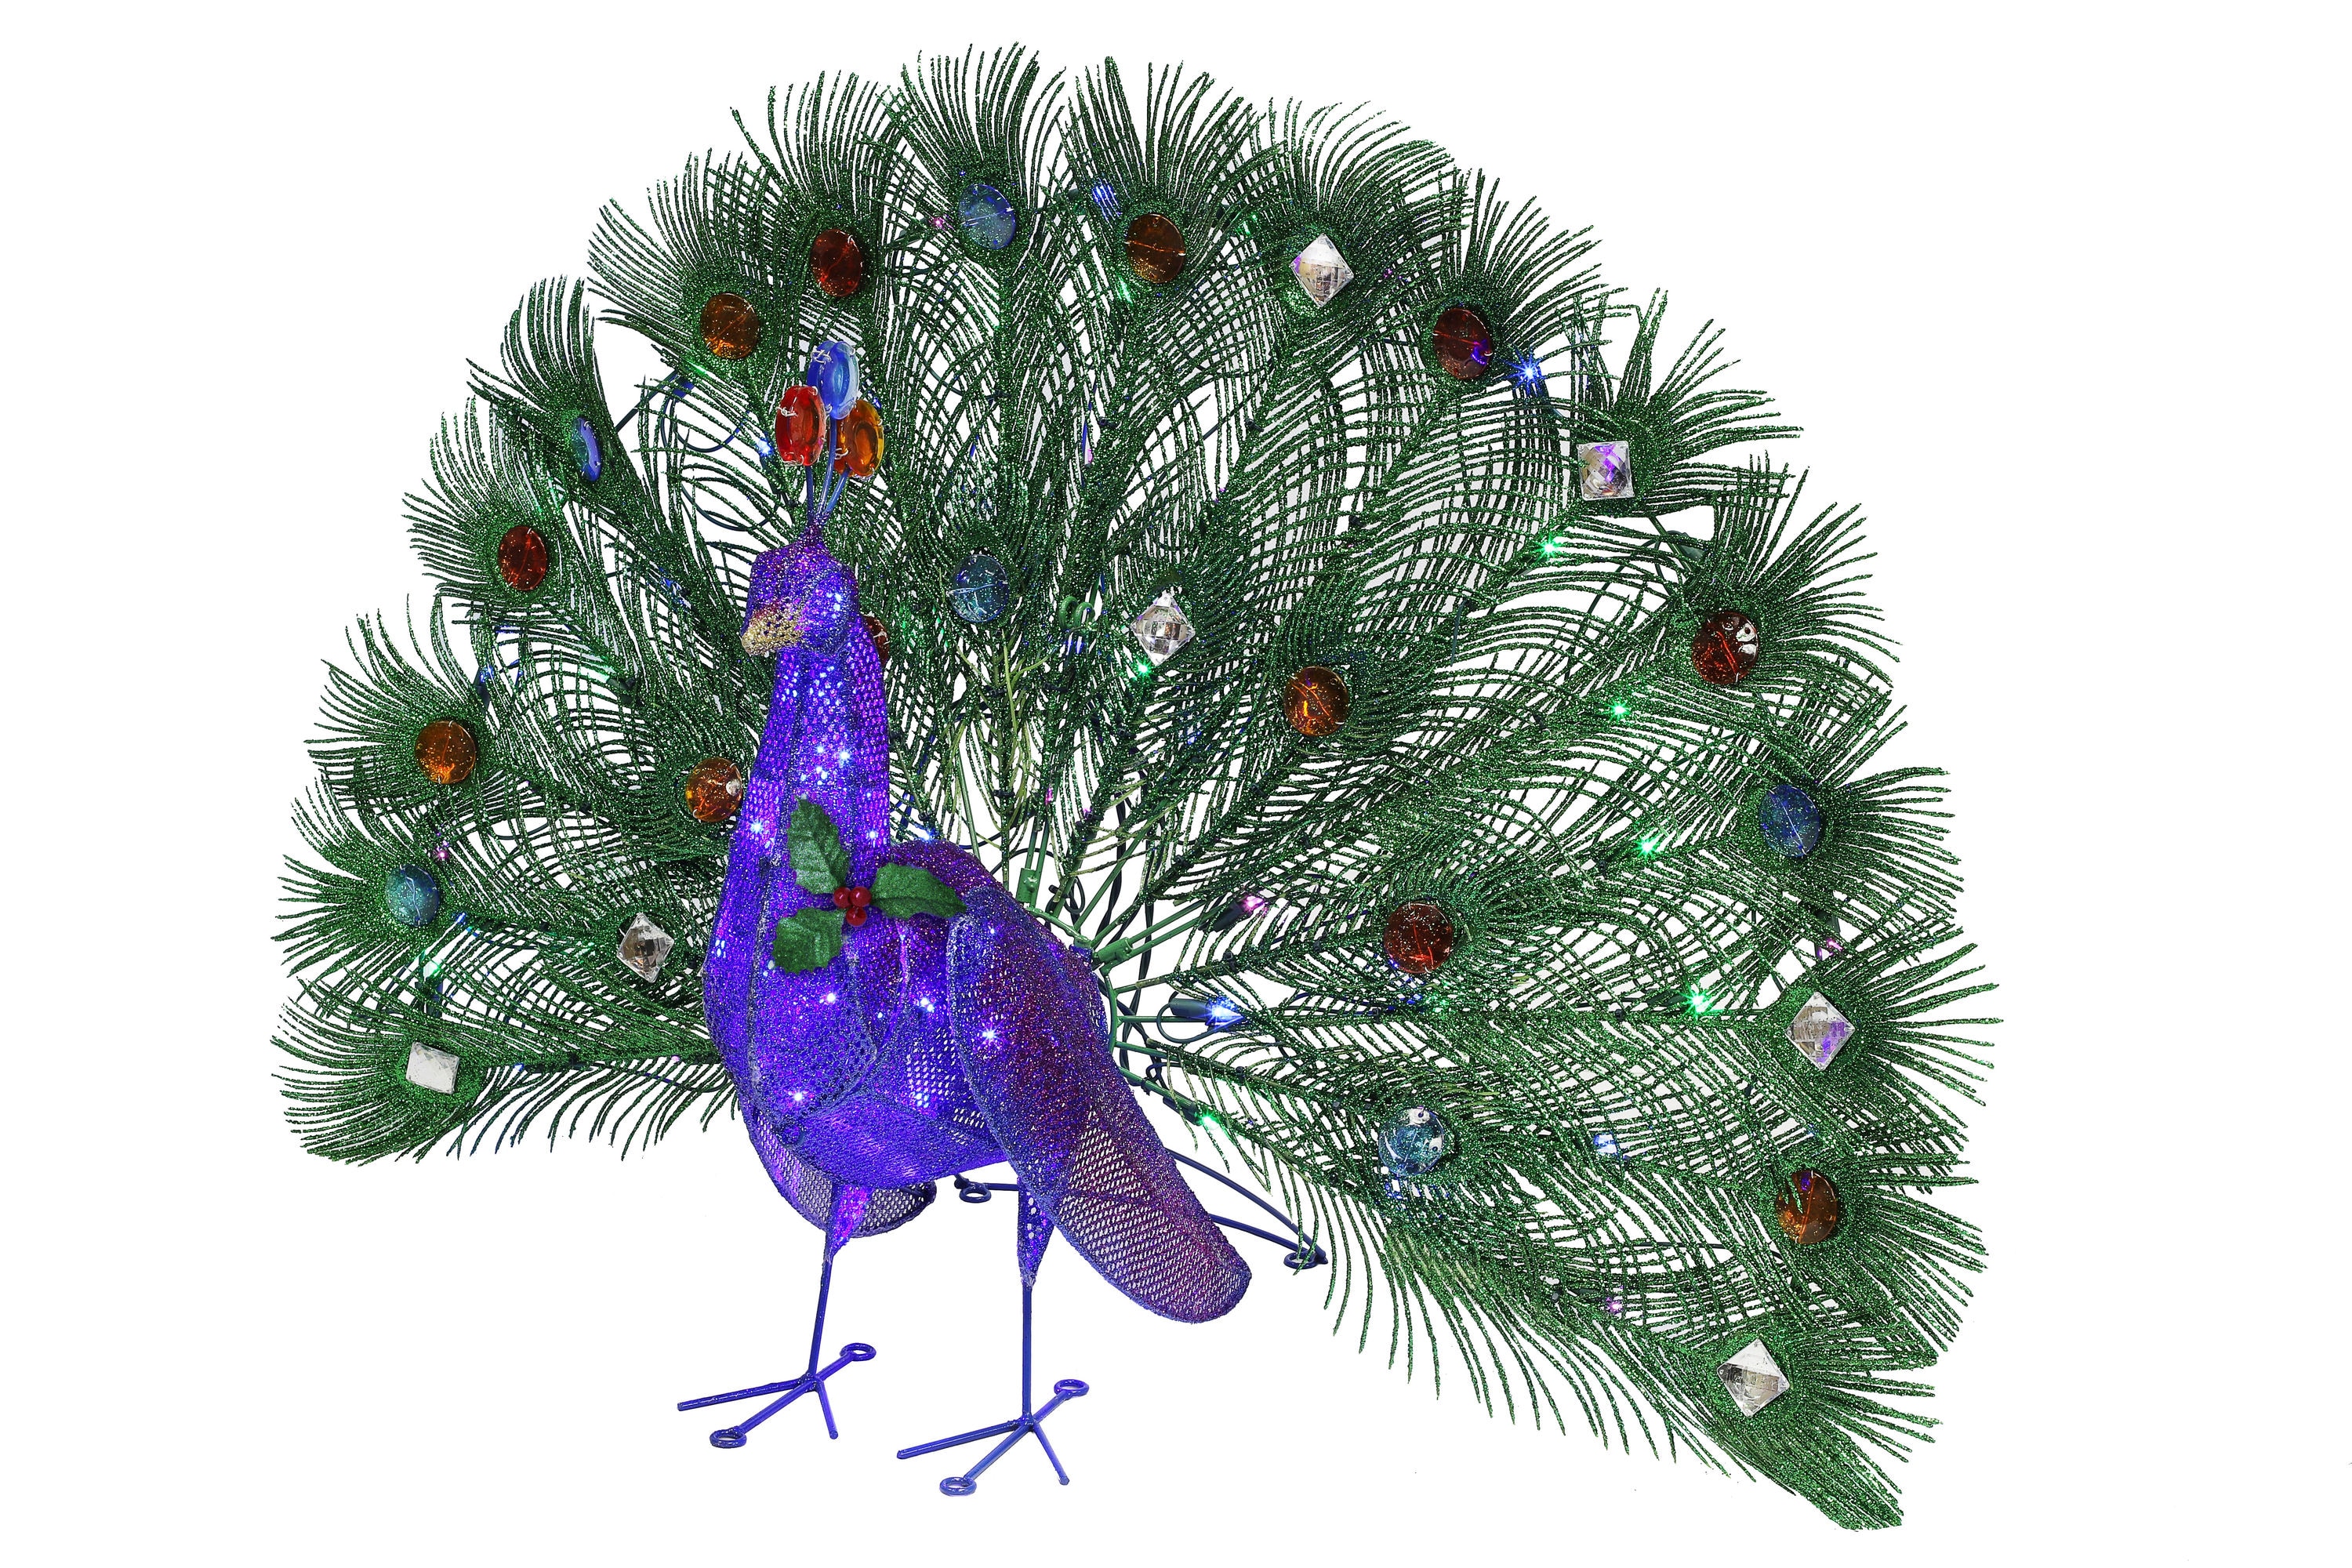 Northlight 19 Colorful Green Regal Peacock Bird with Closed Tail Feathers Christmas Decoration